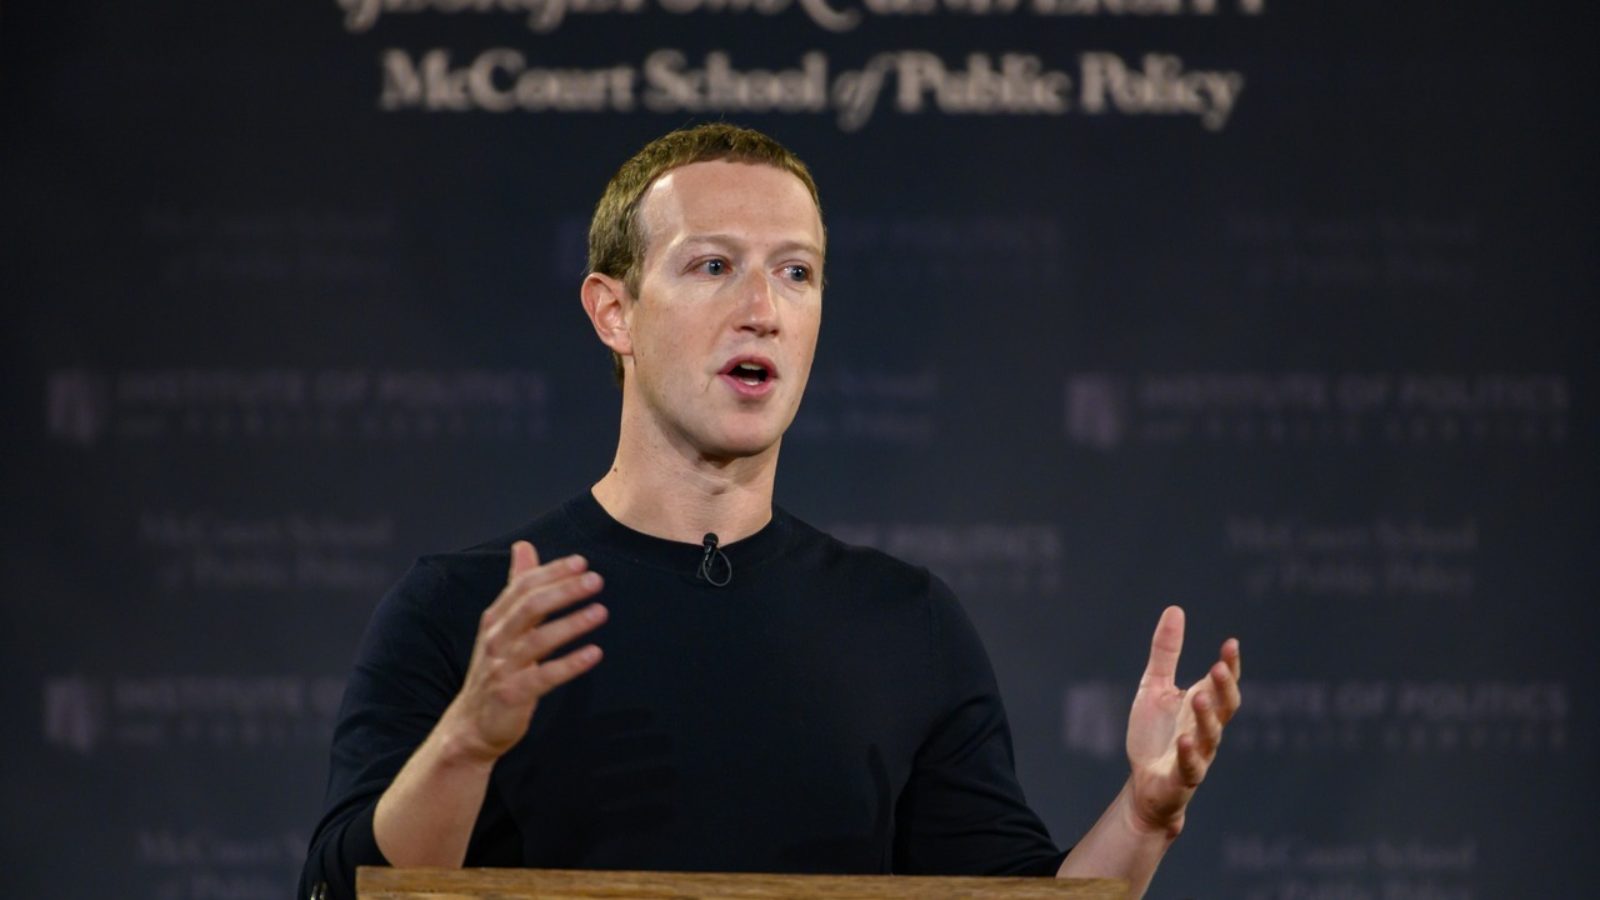 Mark Zuckerberg speaks at a lectern with a blue banner displaying 